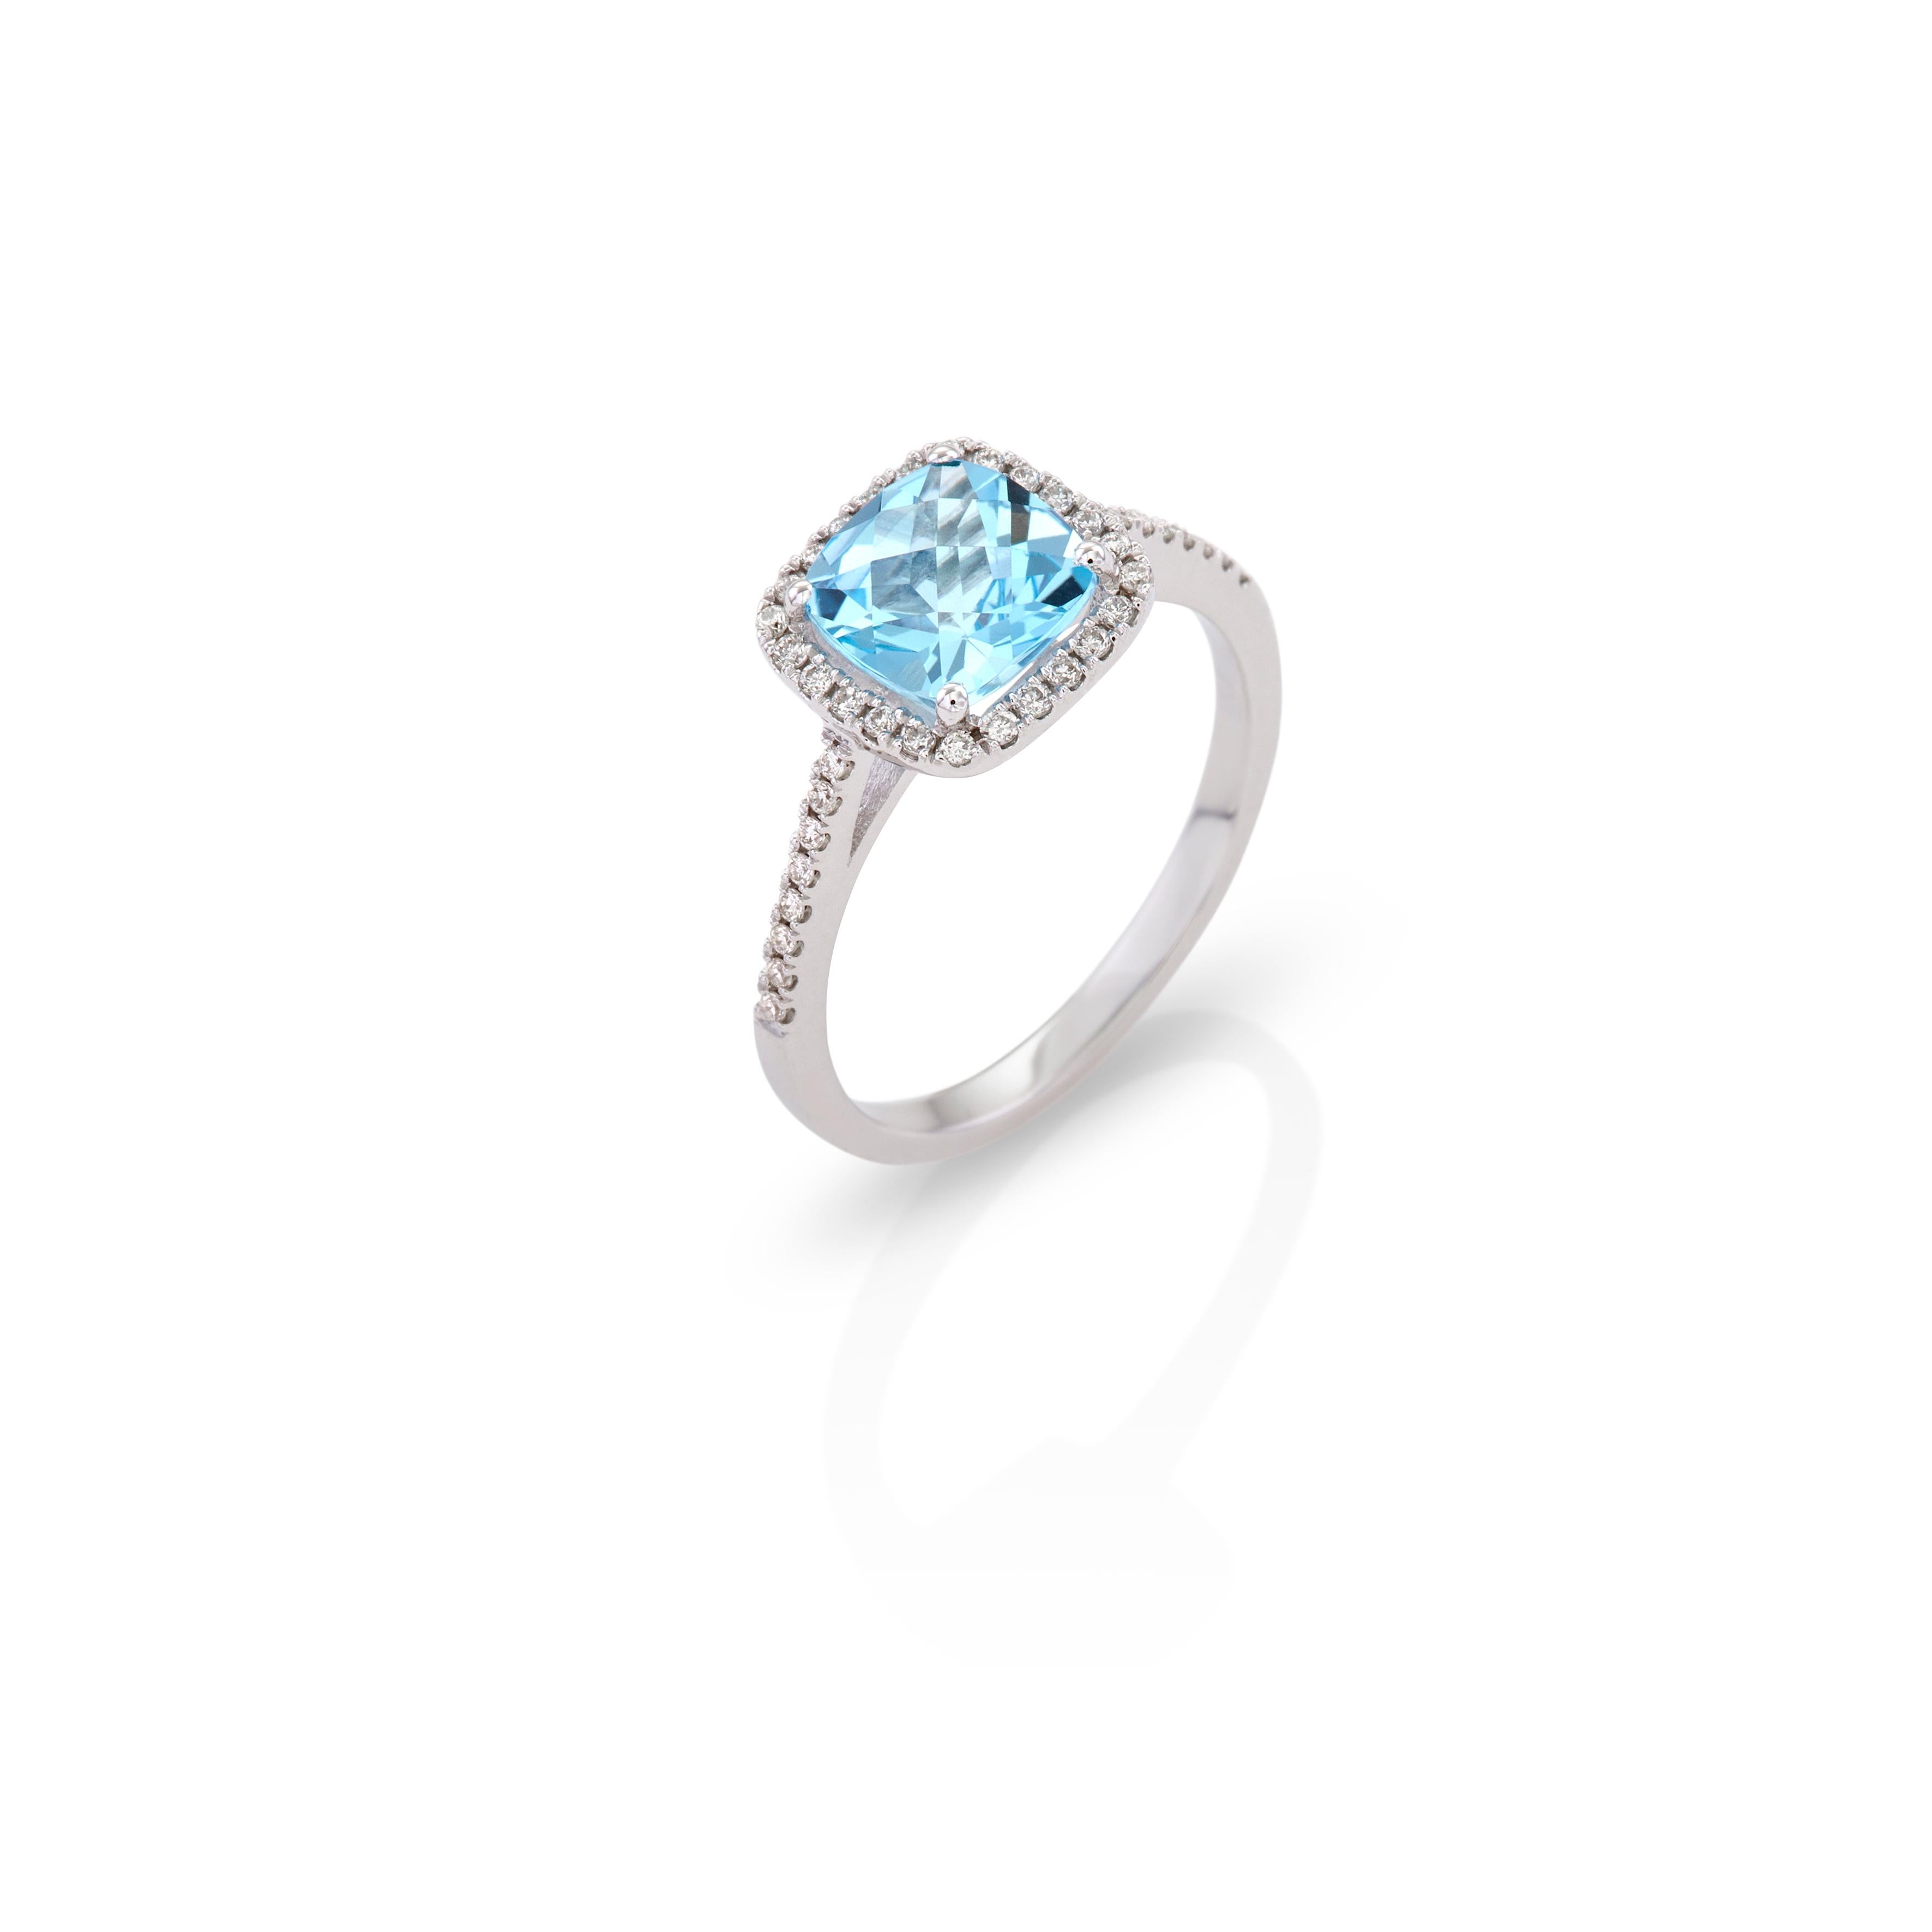 For Sale:  18kt White Gold Ring Cushion Cut Blue Topaz 1.80ct and Micro Pave Diamonds Halo 3